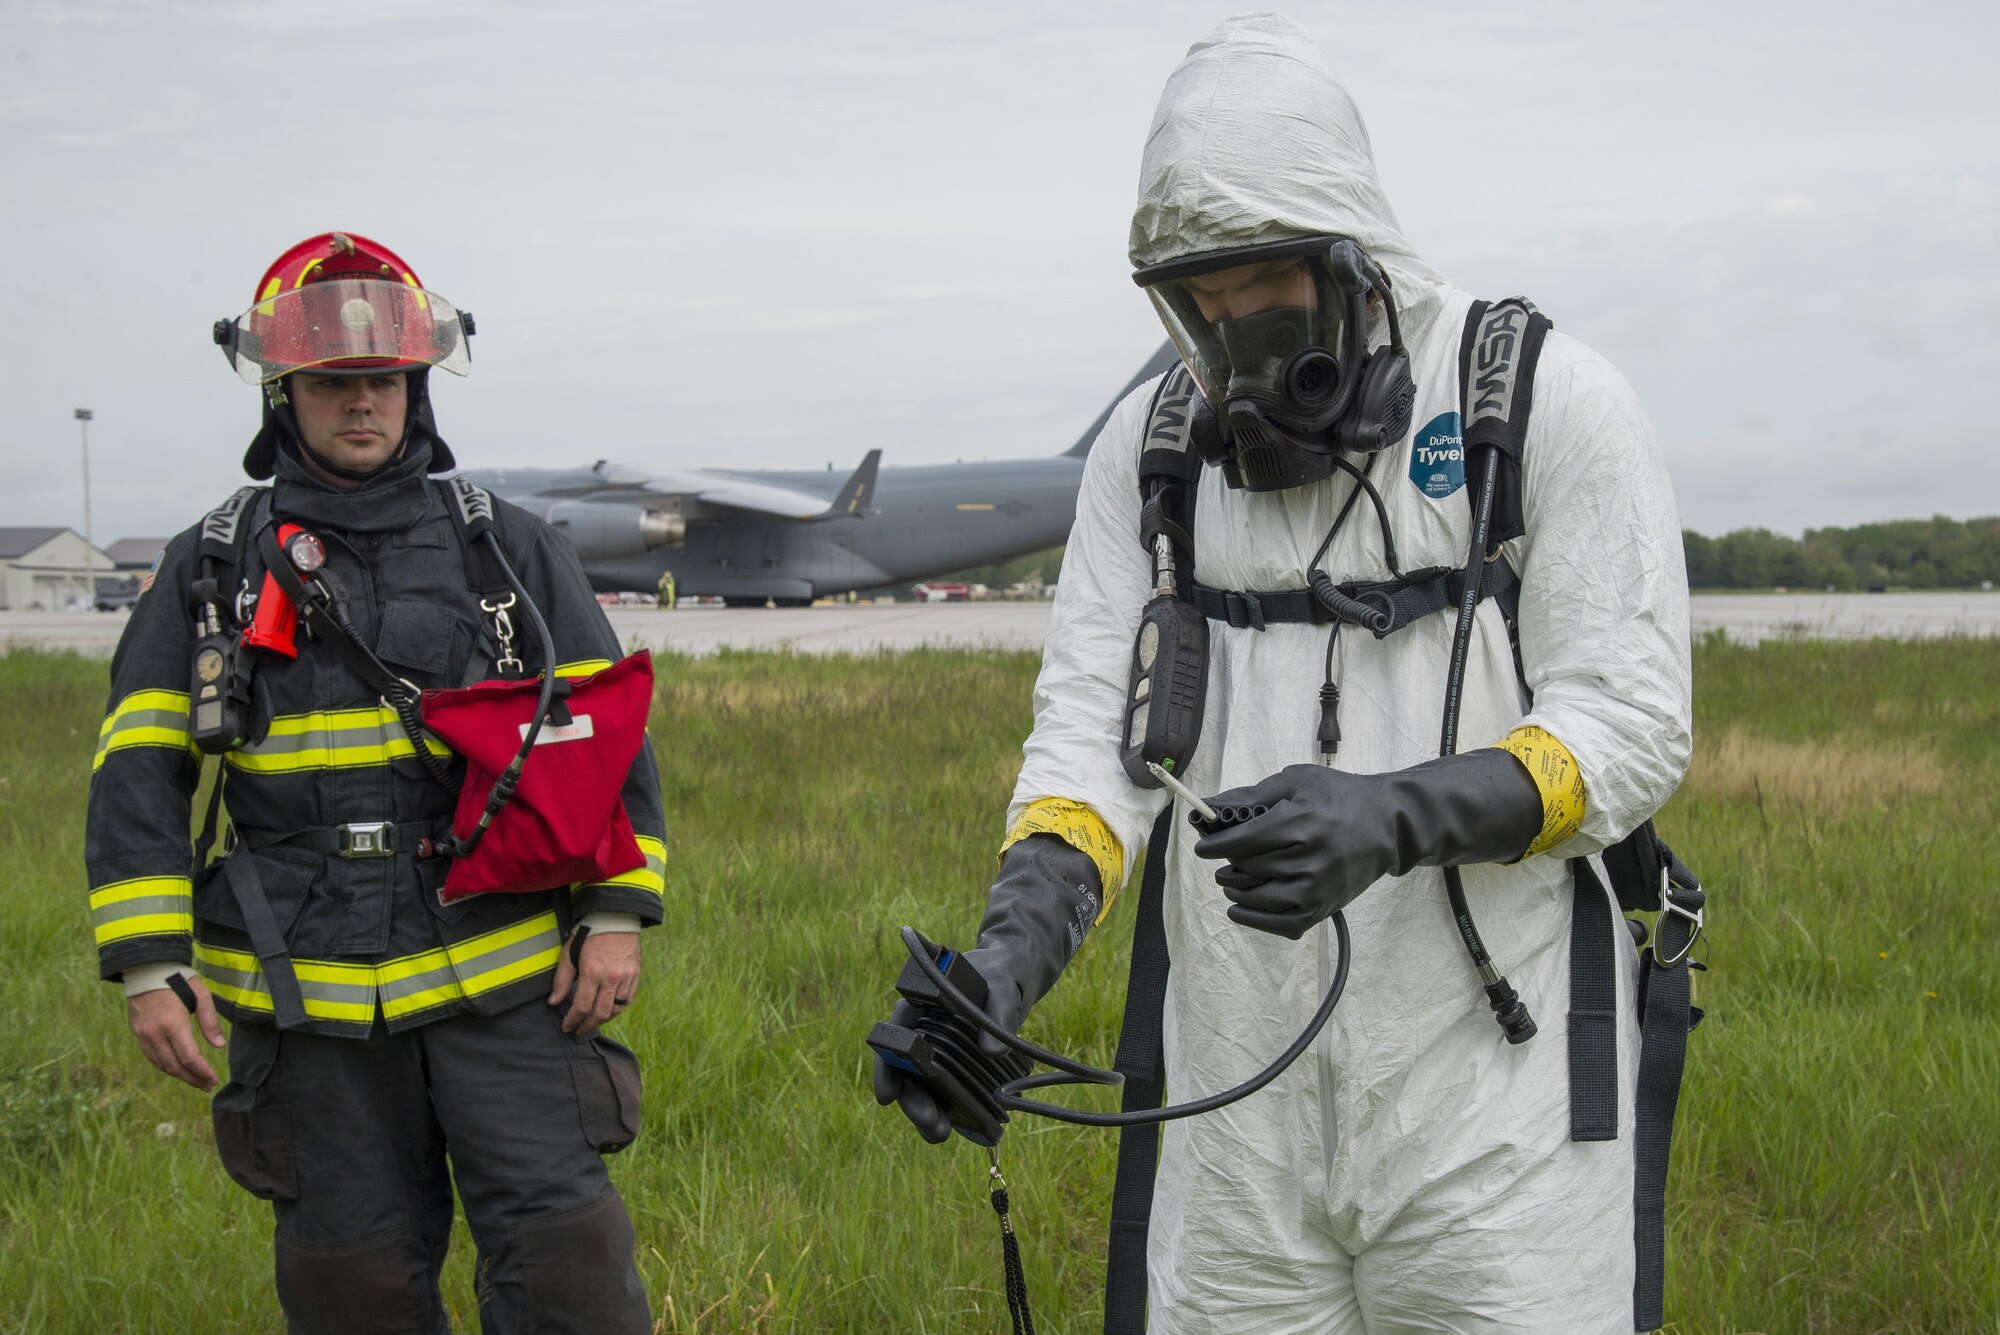 Tech. Sgt. Matthew Miiller, 436th Civil Engineer Squadron Fire Department crew chief, provides communication support as Senior Airman Alexander Delfs, 436th Aerospace Medicine Squadron bioenvironmental engineering technician, uses a Draegar Civil Defense Simultest Kit to measure airborne hydrocarbons at the scene of a simulated fuel spill during an exercise April 20, 2017, near a flightline drainage spill gate on Dover Air Force Base, Del. Bioenvironmental engineering technicians provide various hazmat response capabilities around the Air Force. (U.S. Air Force photo by Senior Airman Aaron J. Jenne)